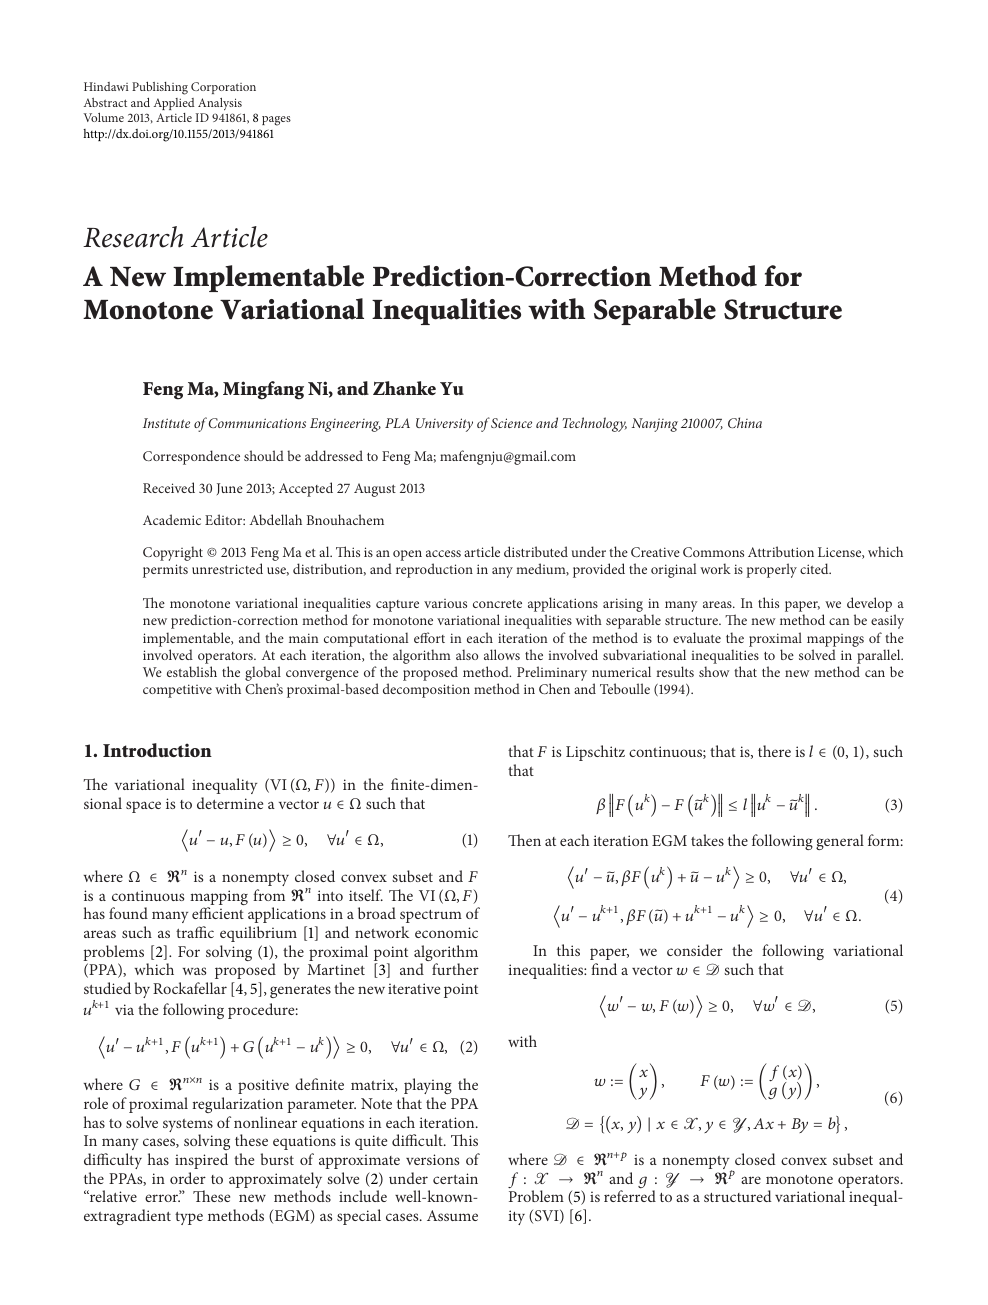 A New Implementable Prediction Correction Method For Monotone Variational Inequalities With Separable Structure Topic Of Research Paper In Mathematics Download Scholarly Article Pdf And Read For Free On Cyberleninka Open Science Hub